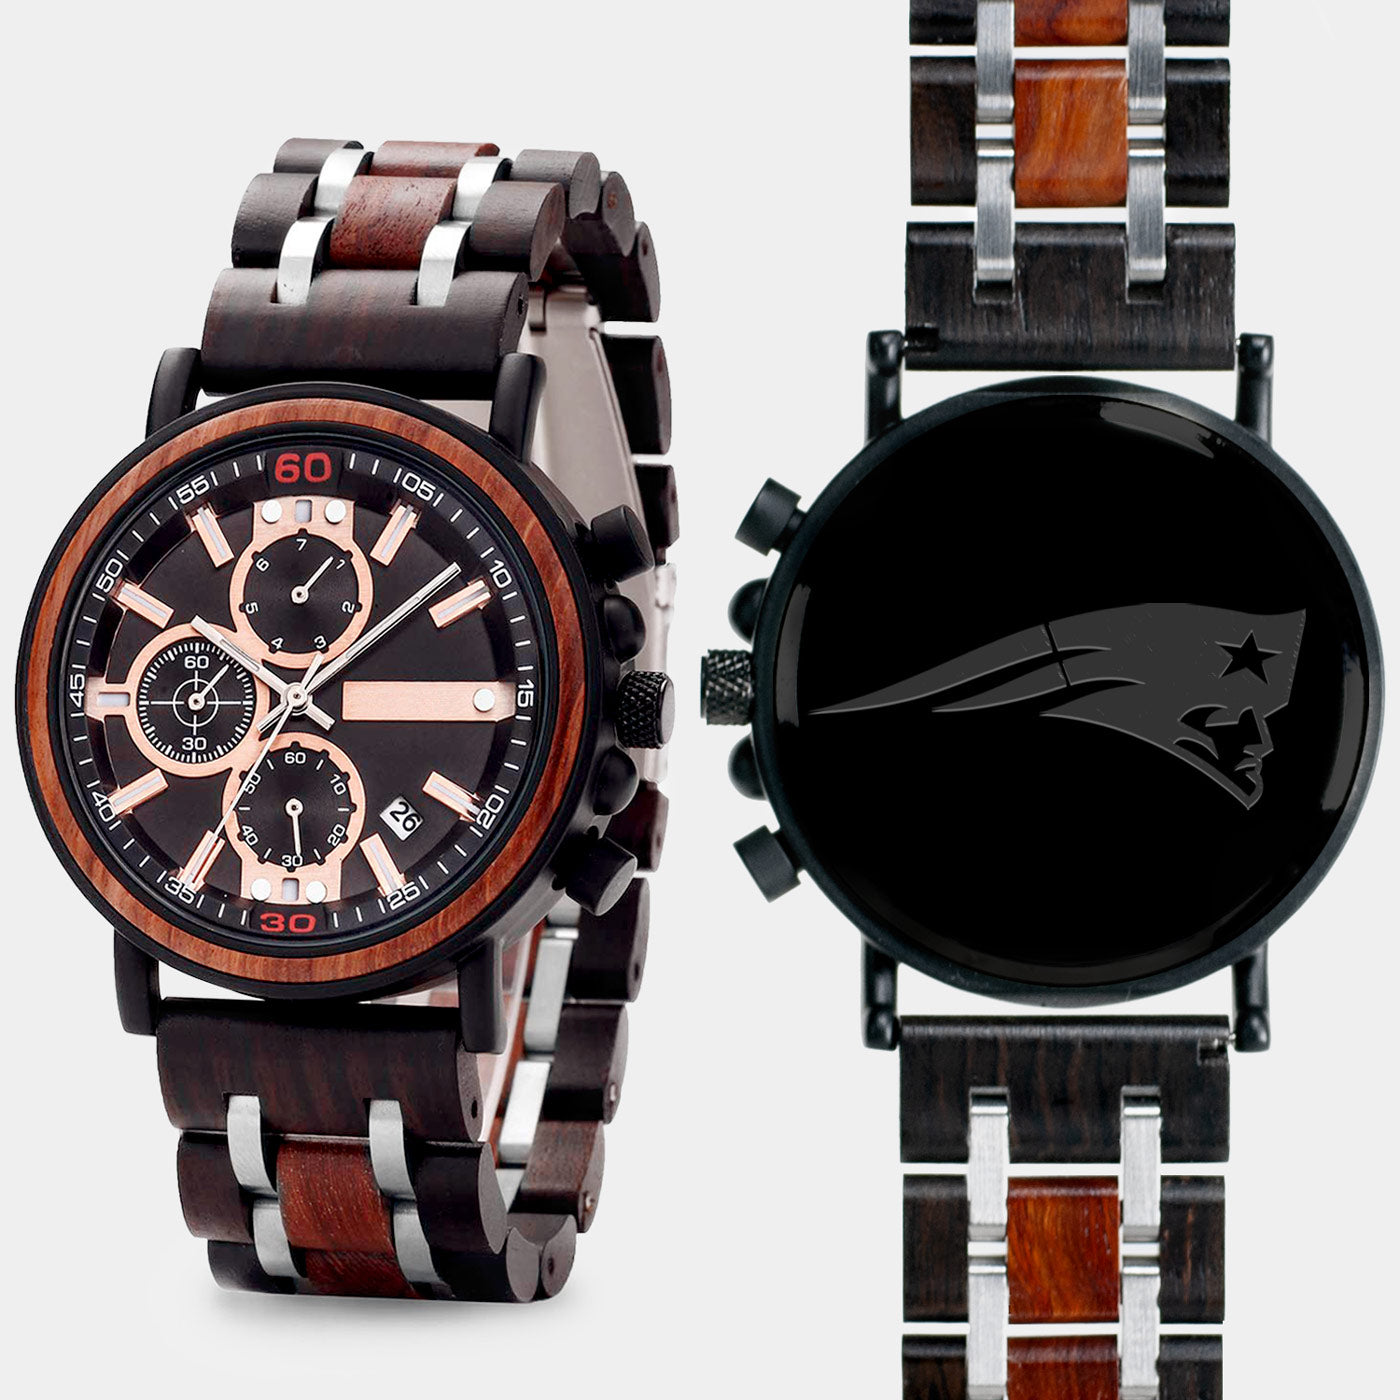 New England Patriots Mens Wrist Watch  - Personalized New England Patriots Mens Watches - Custom Gifts For Him, Birthday Gifts, Gift For Dad - Best 2022 New England Patriots Christmas Gifts - Black 45mm NFL Wood Watch